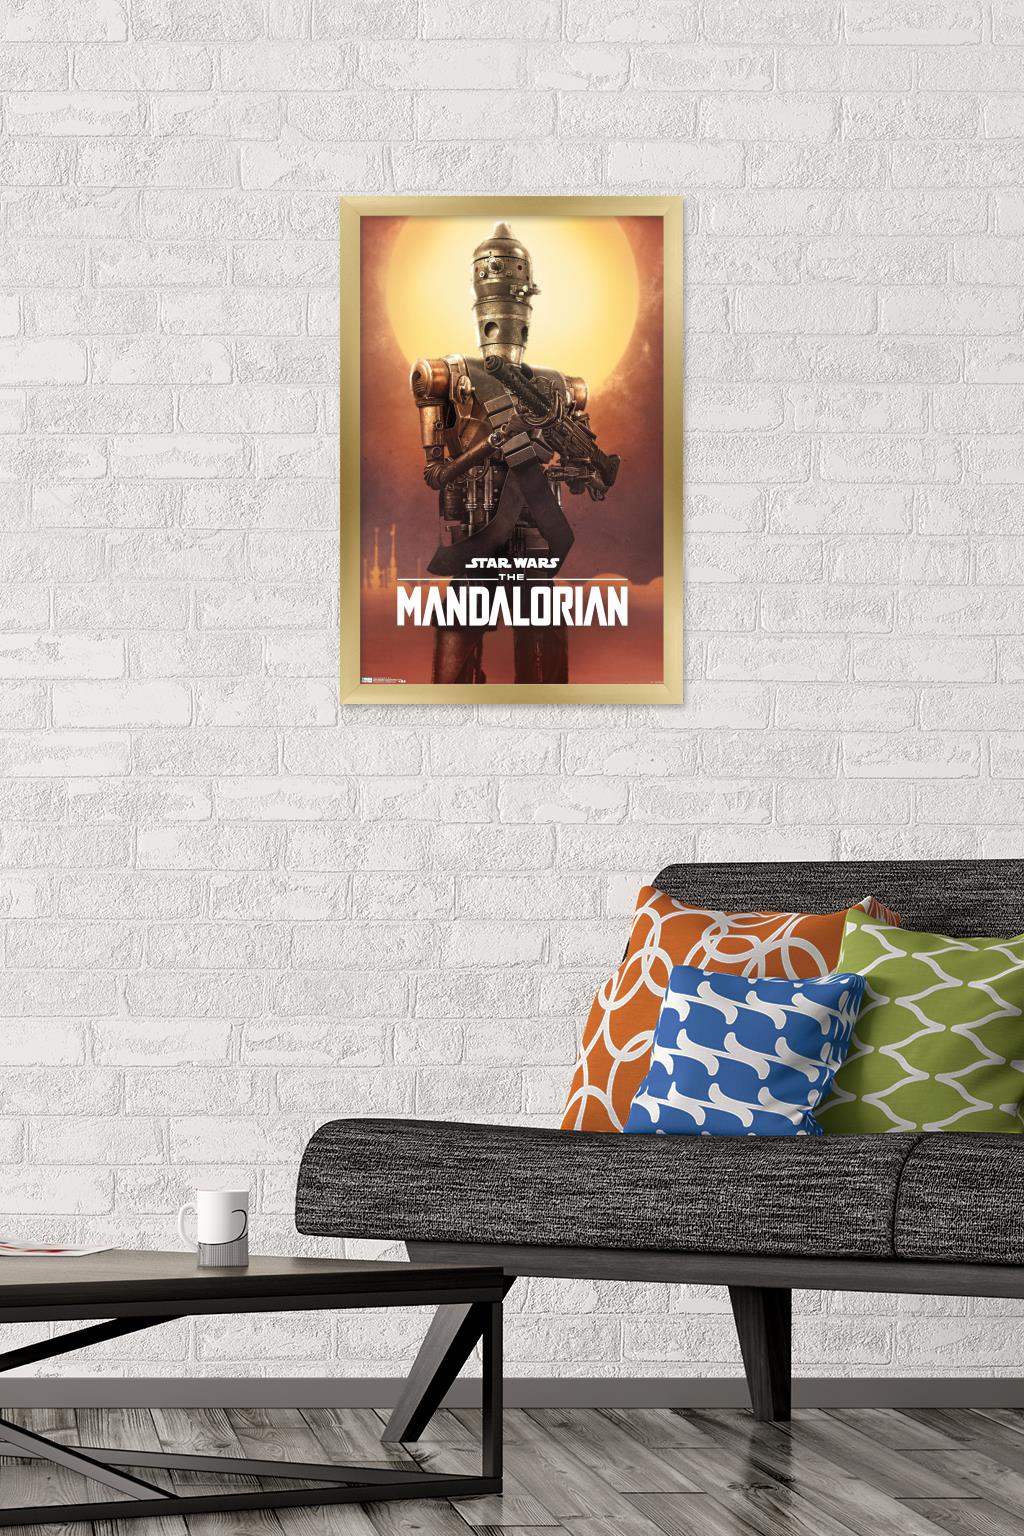 Star Wars: The Mandalorian - IG-11 Wall Poster, 14.725" x 22.375", Framed - image 2 of 5